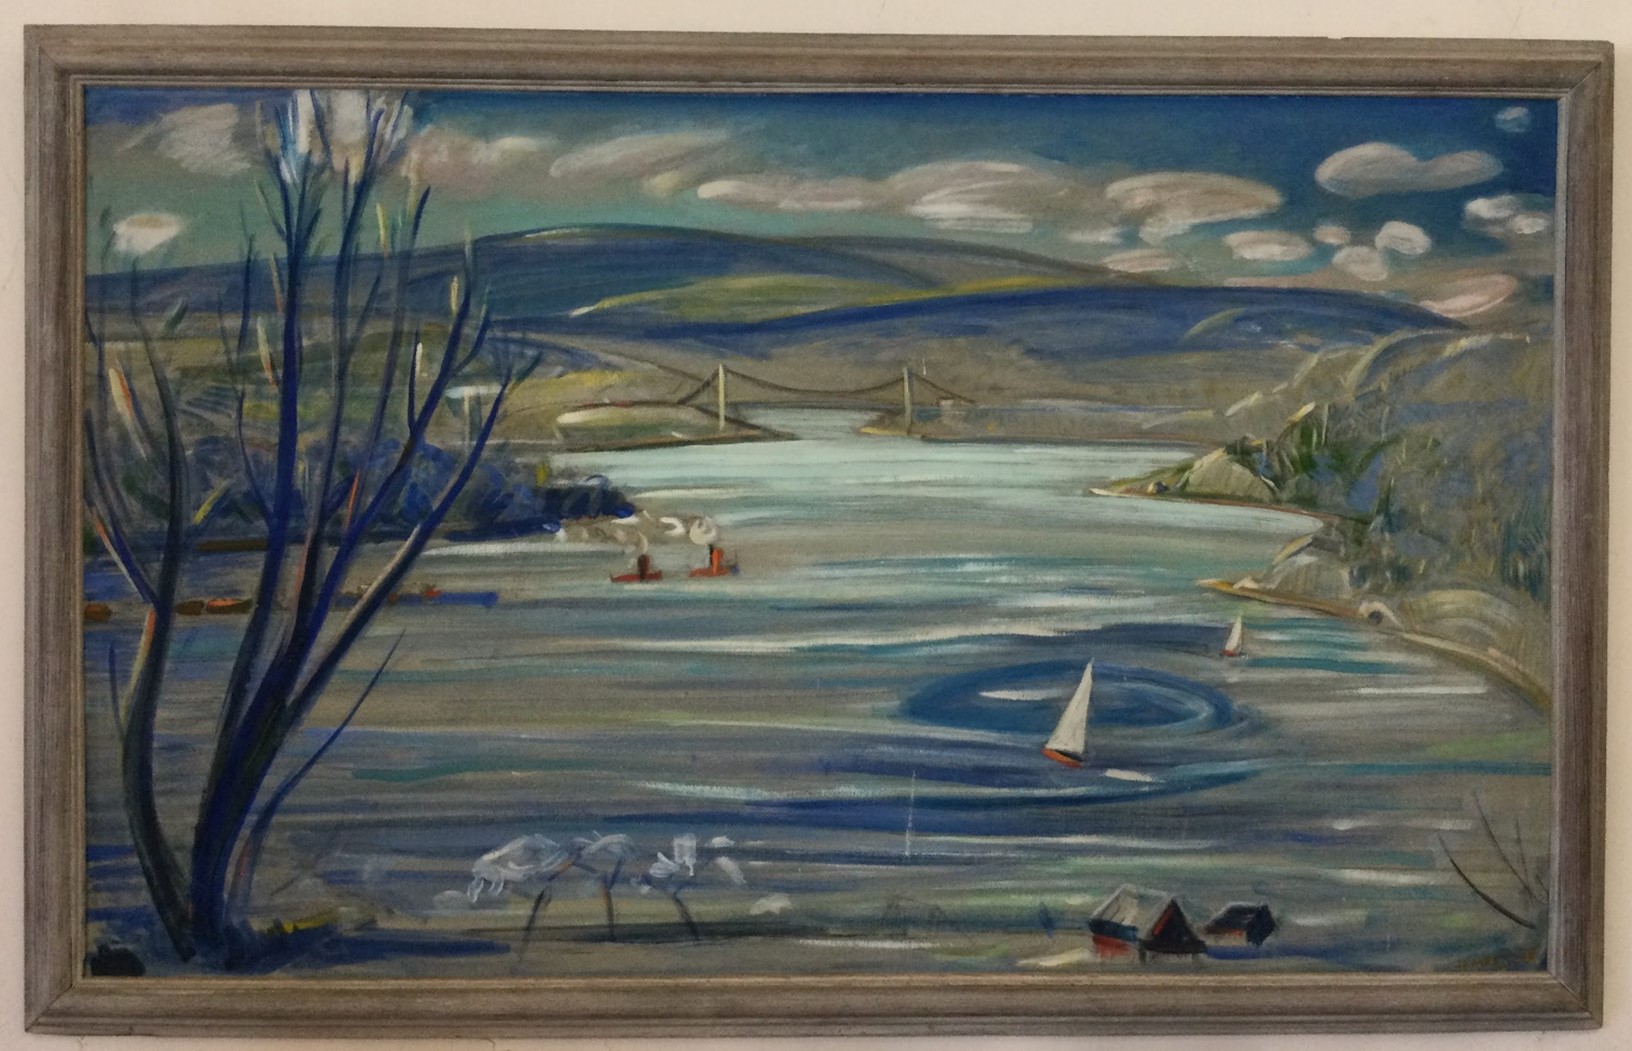 "Untitled" by James Scott. Oil painting depicting boats on a river with a bridge and Mountains in the background.